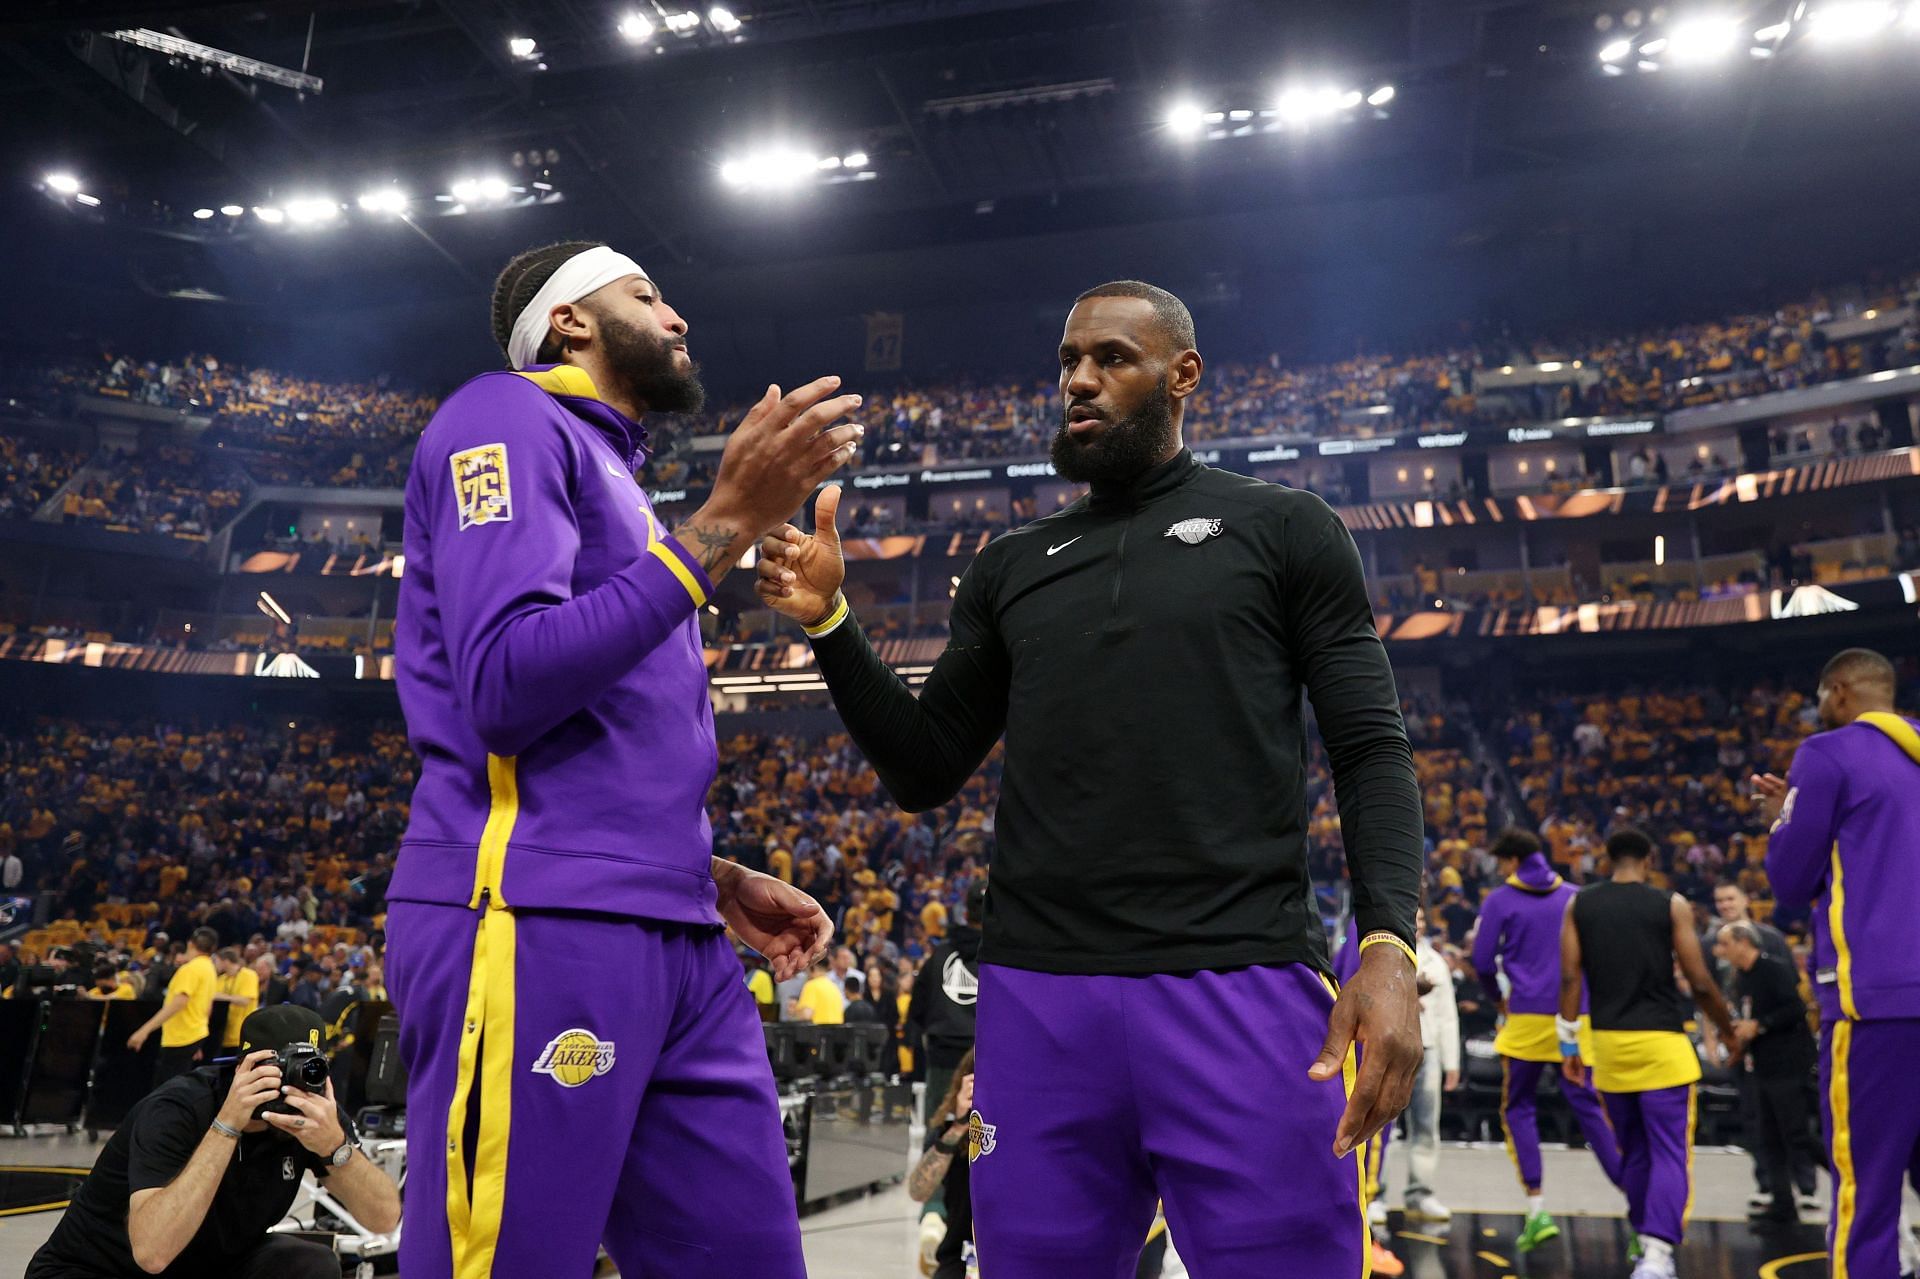 Anthony Davis (foot) probable Game 1 for Lakers